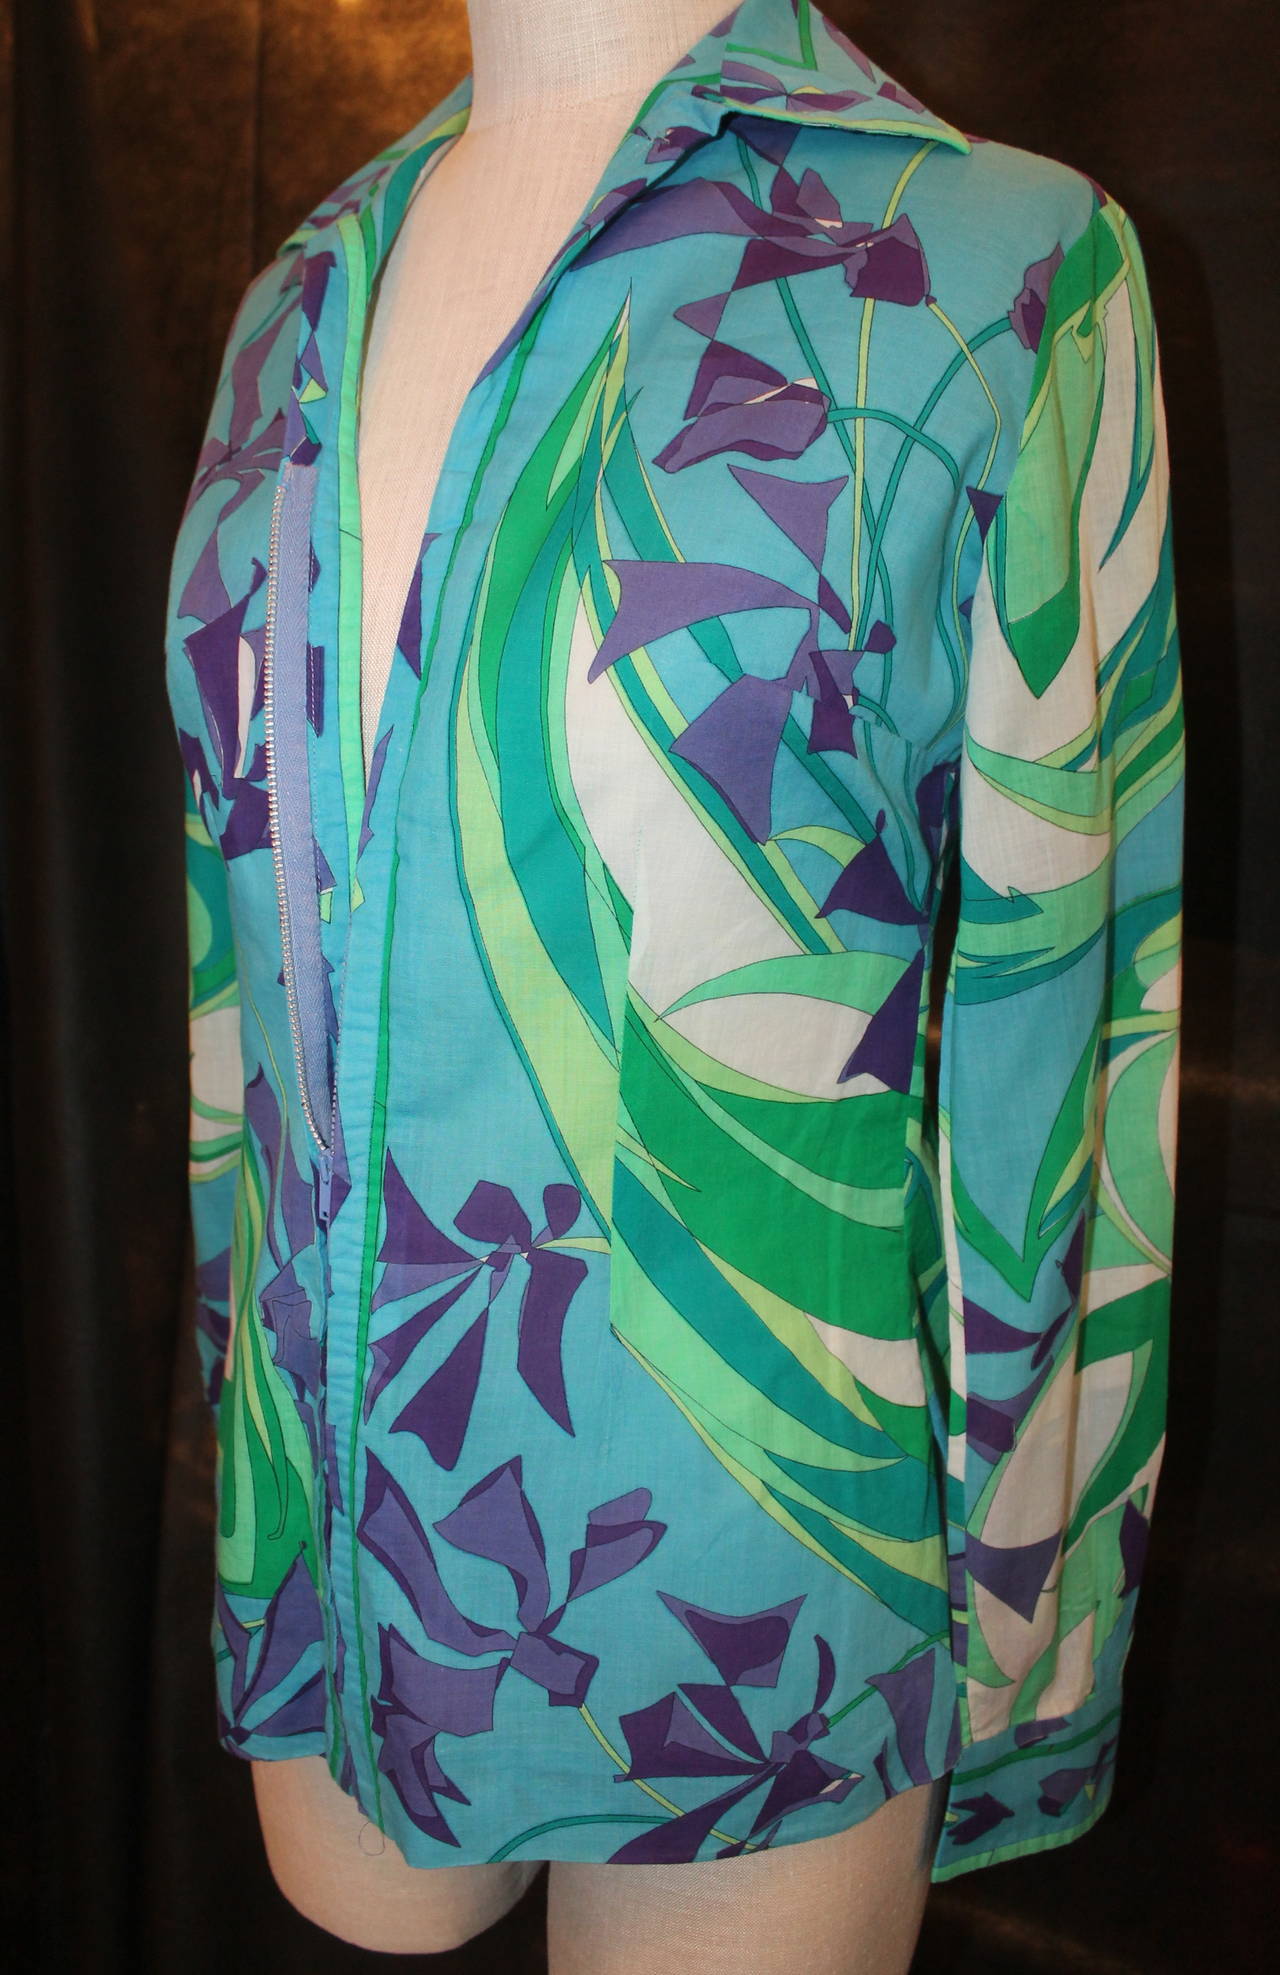 Pucci Vintage Teal Floral Print Jacket/Shirt - circa 1960s - S. This jacket is in very good vintage condition with minor wear. It is a vintage size 10. 

Measurements:
Bust- 34"
Waist- 31"
Shoulder to Shoulder- 14.5"
Length-